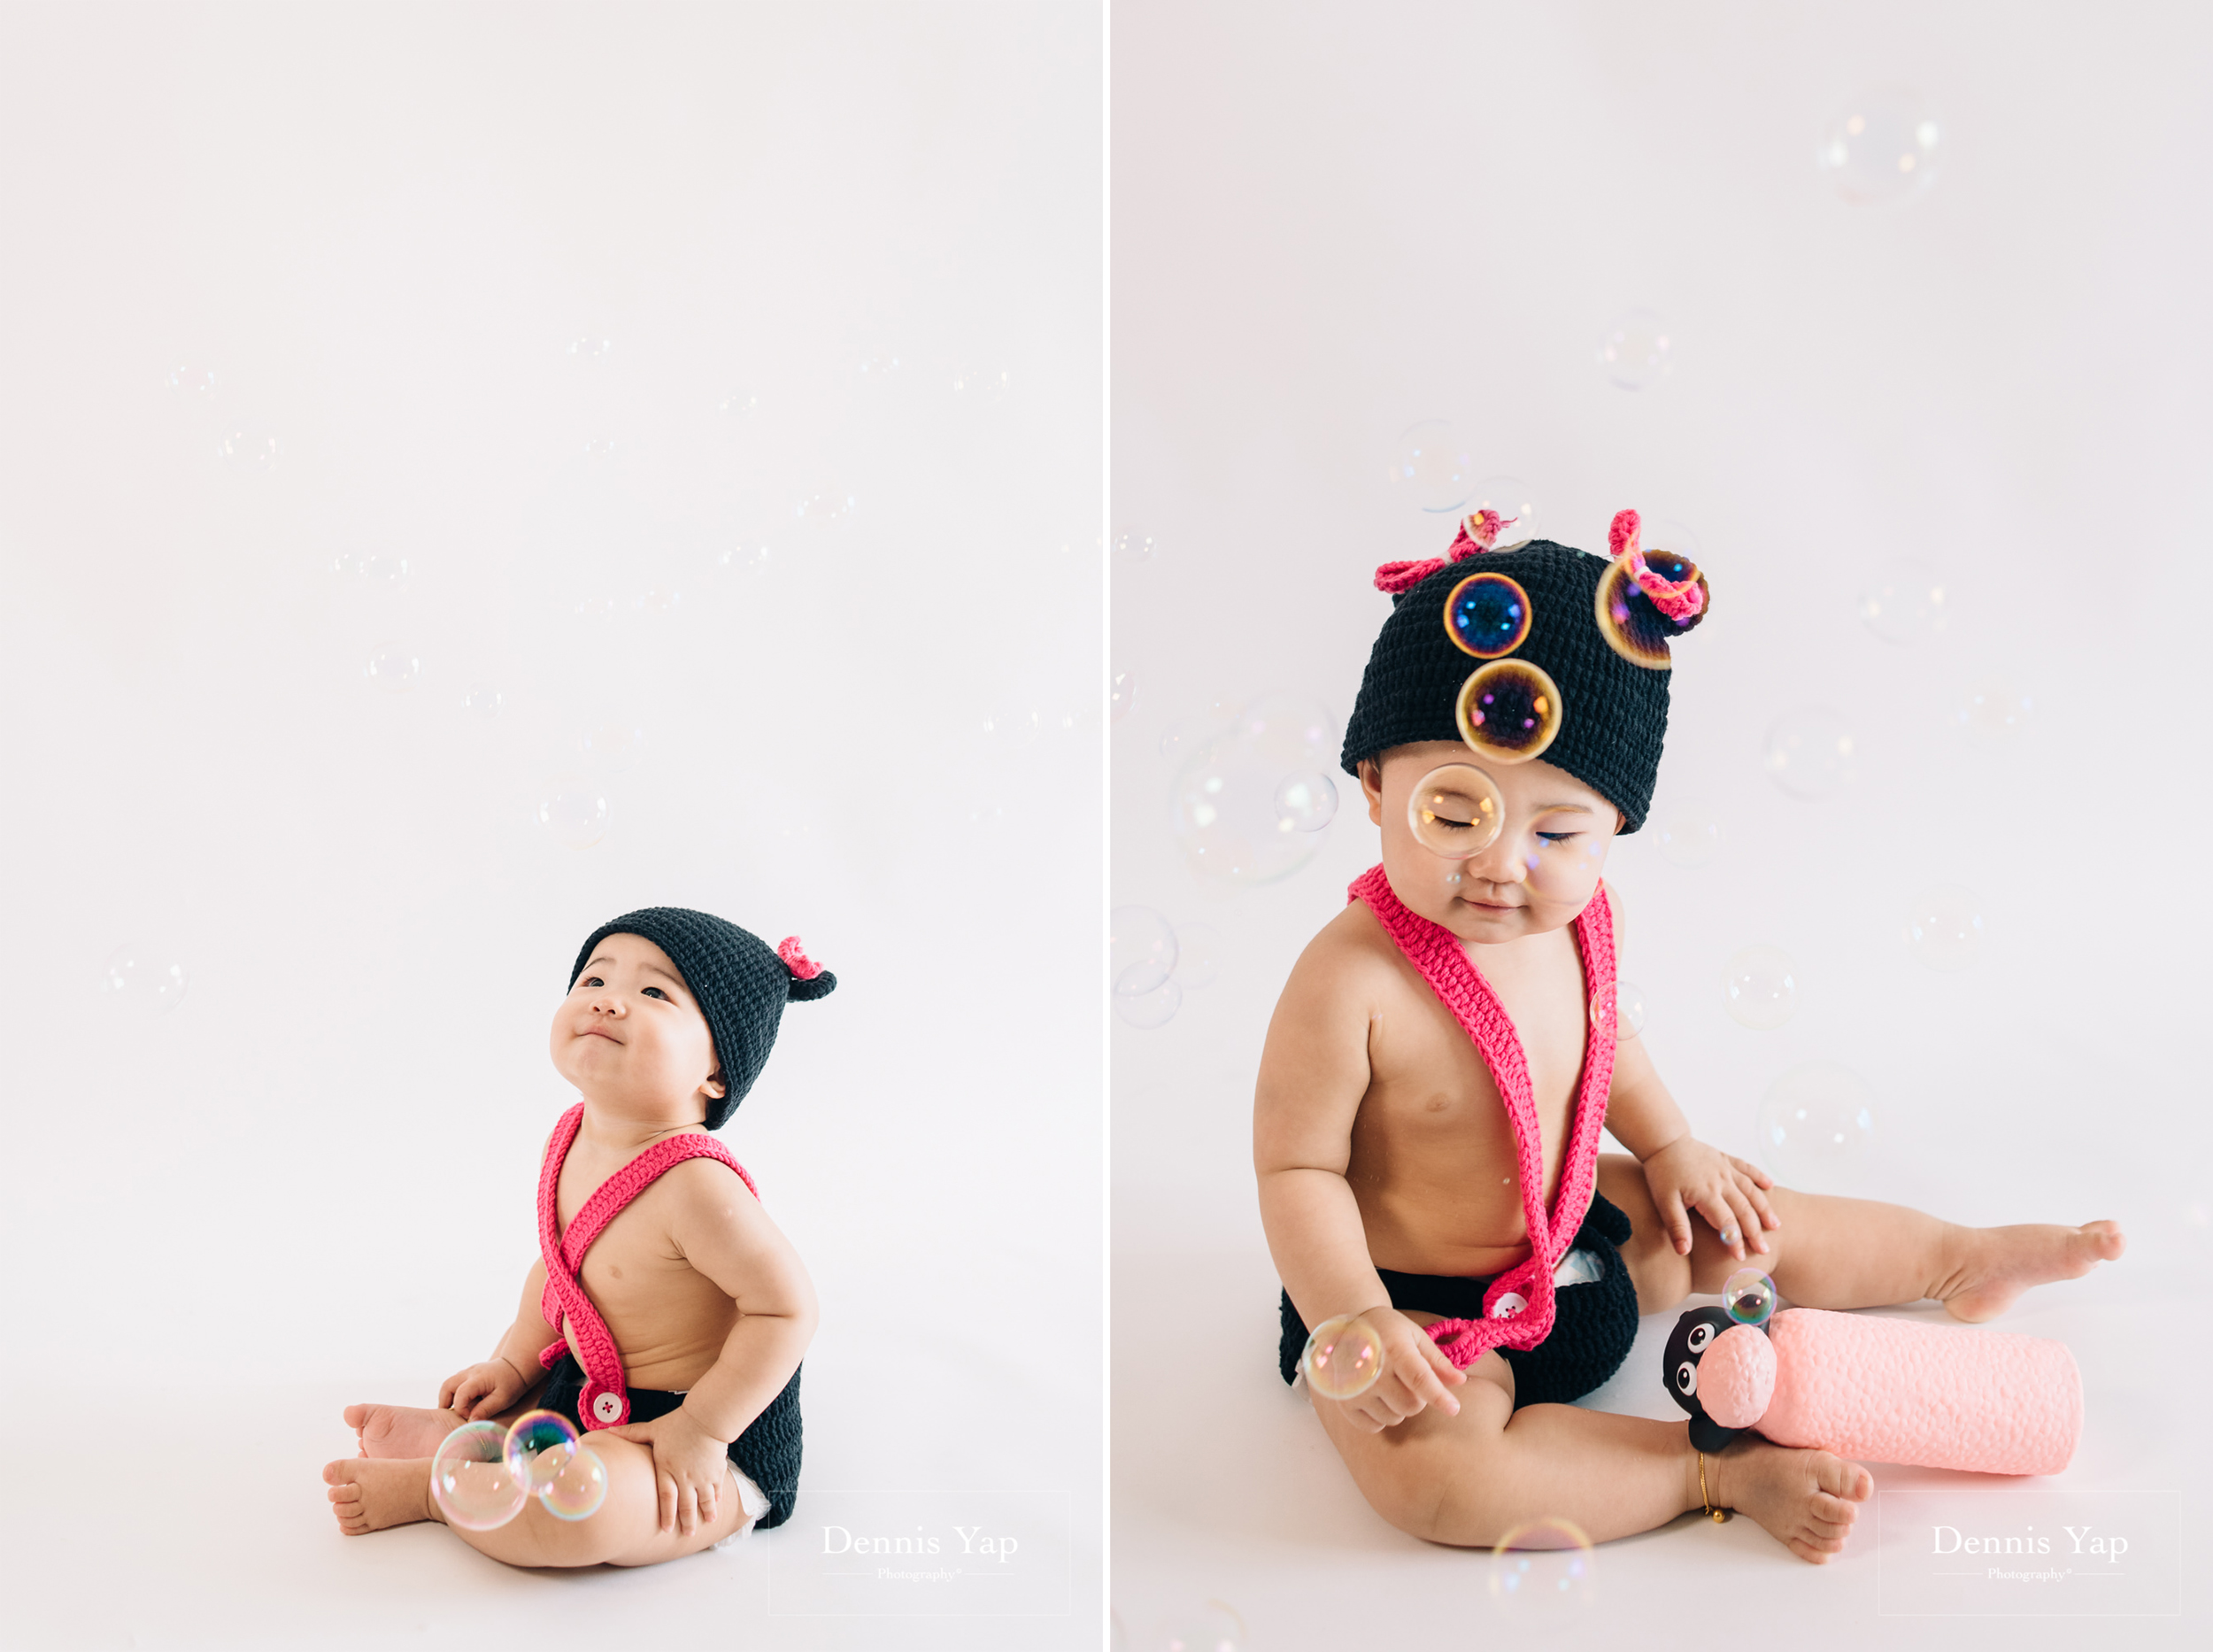 isaac evon family baby portrait funny style dennis yap photography-15.jpg